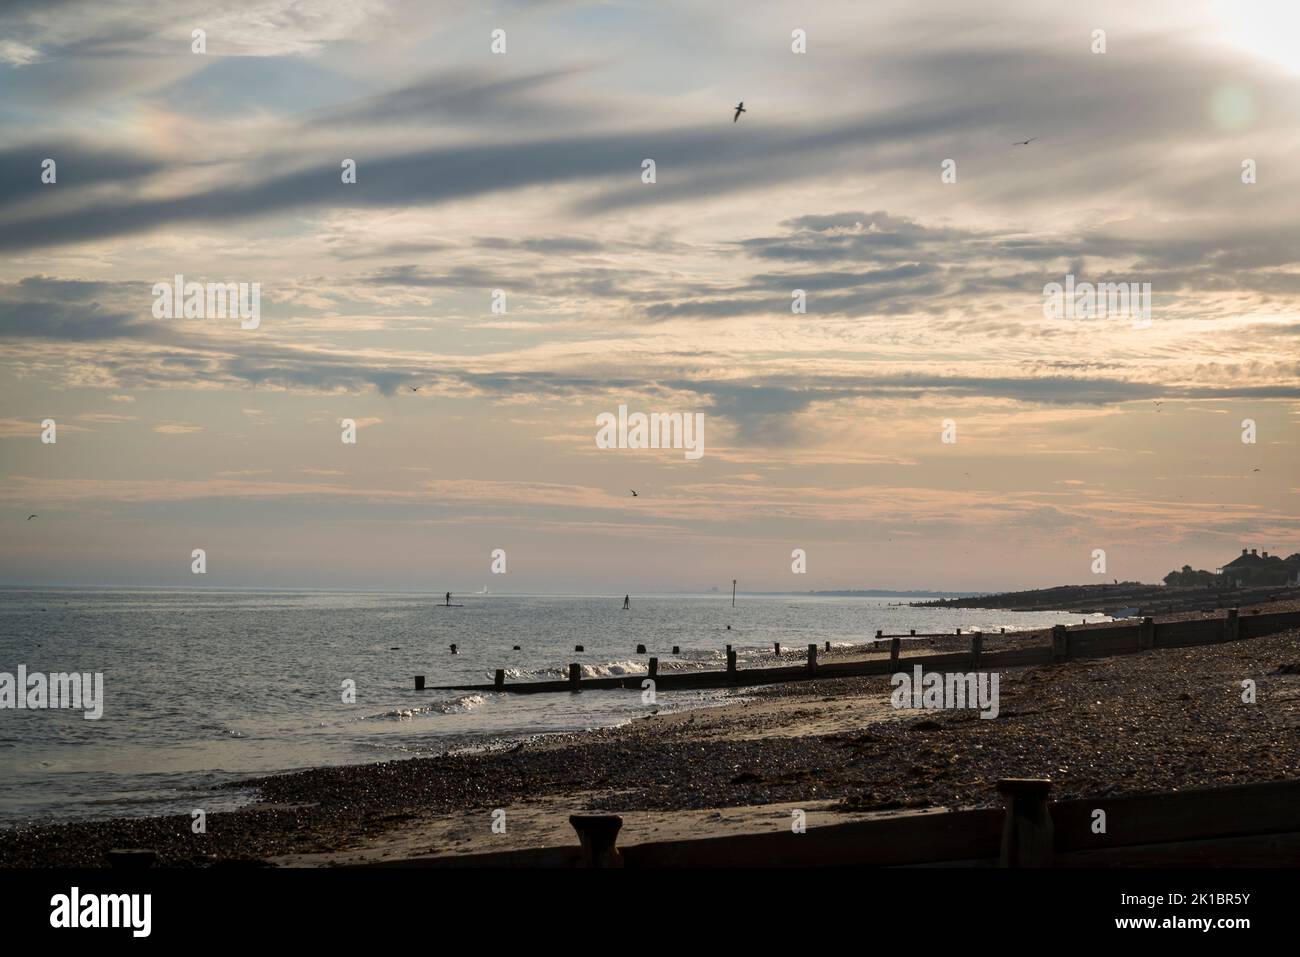 Seashore with groynes preventing beach erosion at Ferring at sunset, West Sussex, England, UK Stock Photo